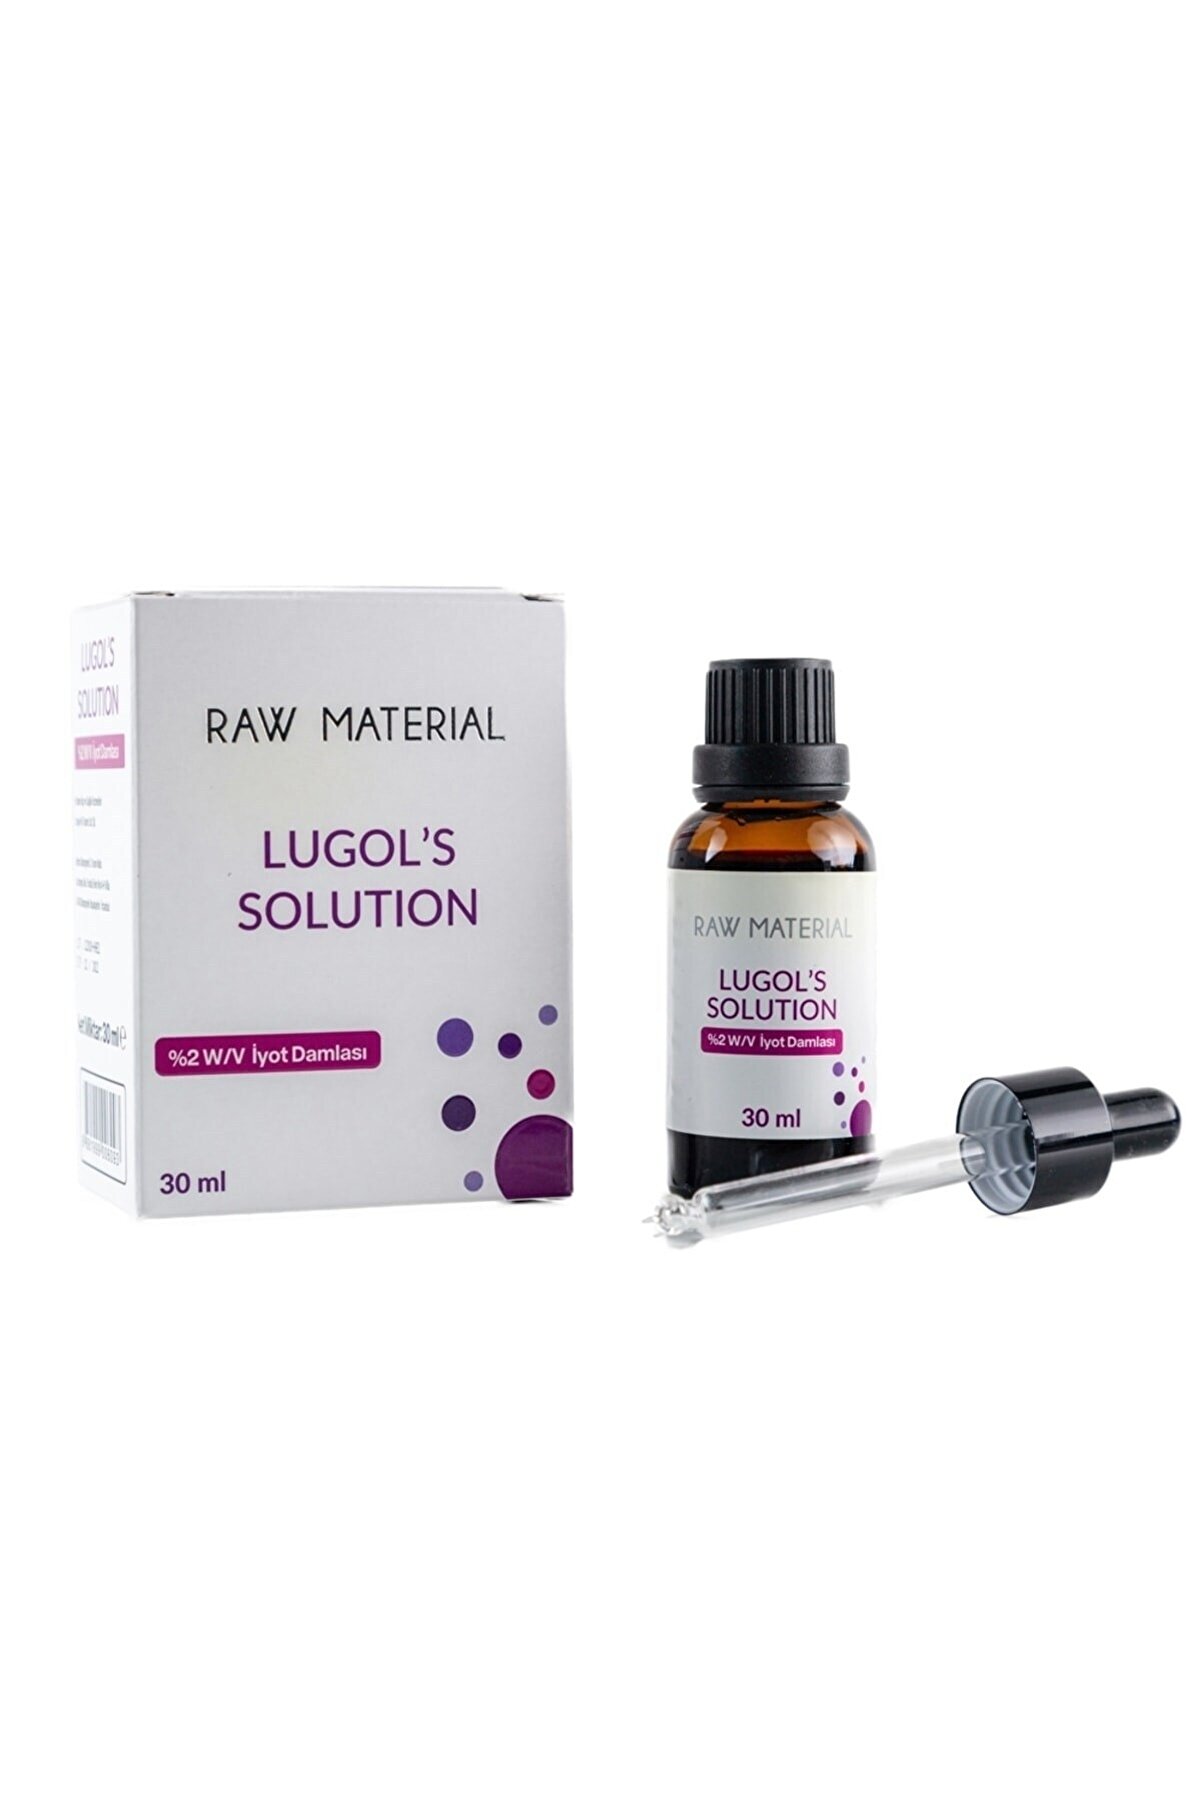 MORE THAN Raw Materal Lugol's Solition Damla 30 ml